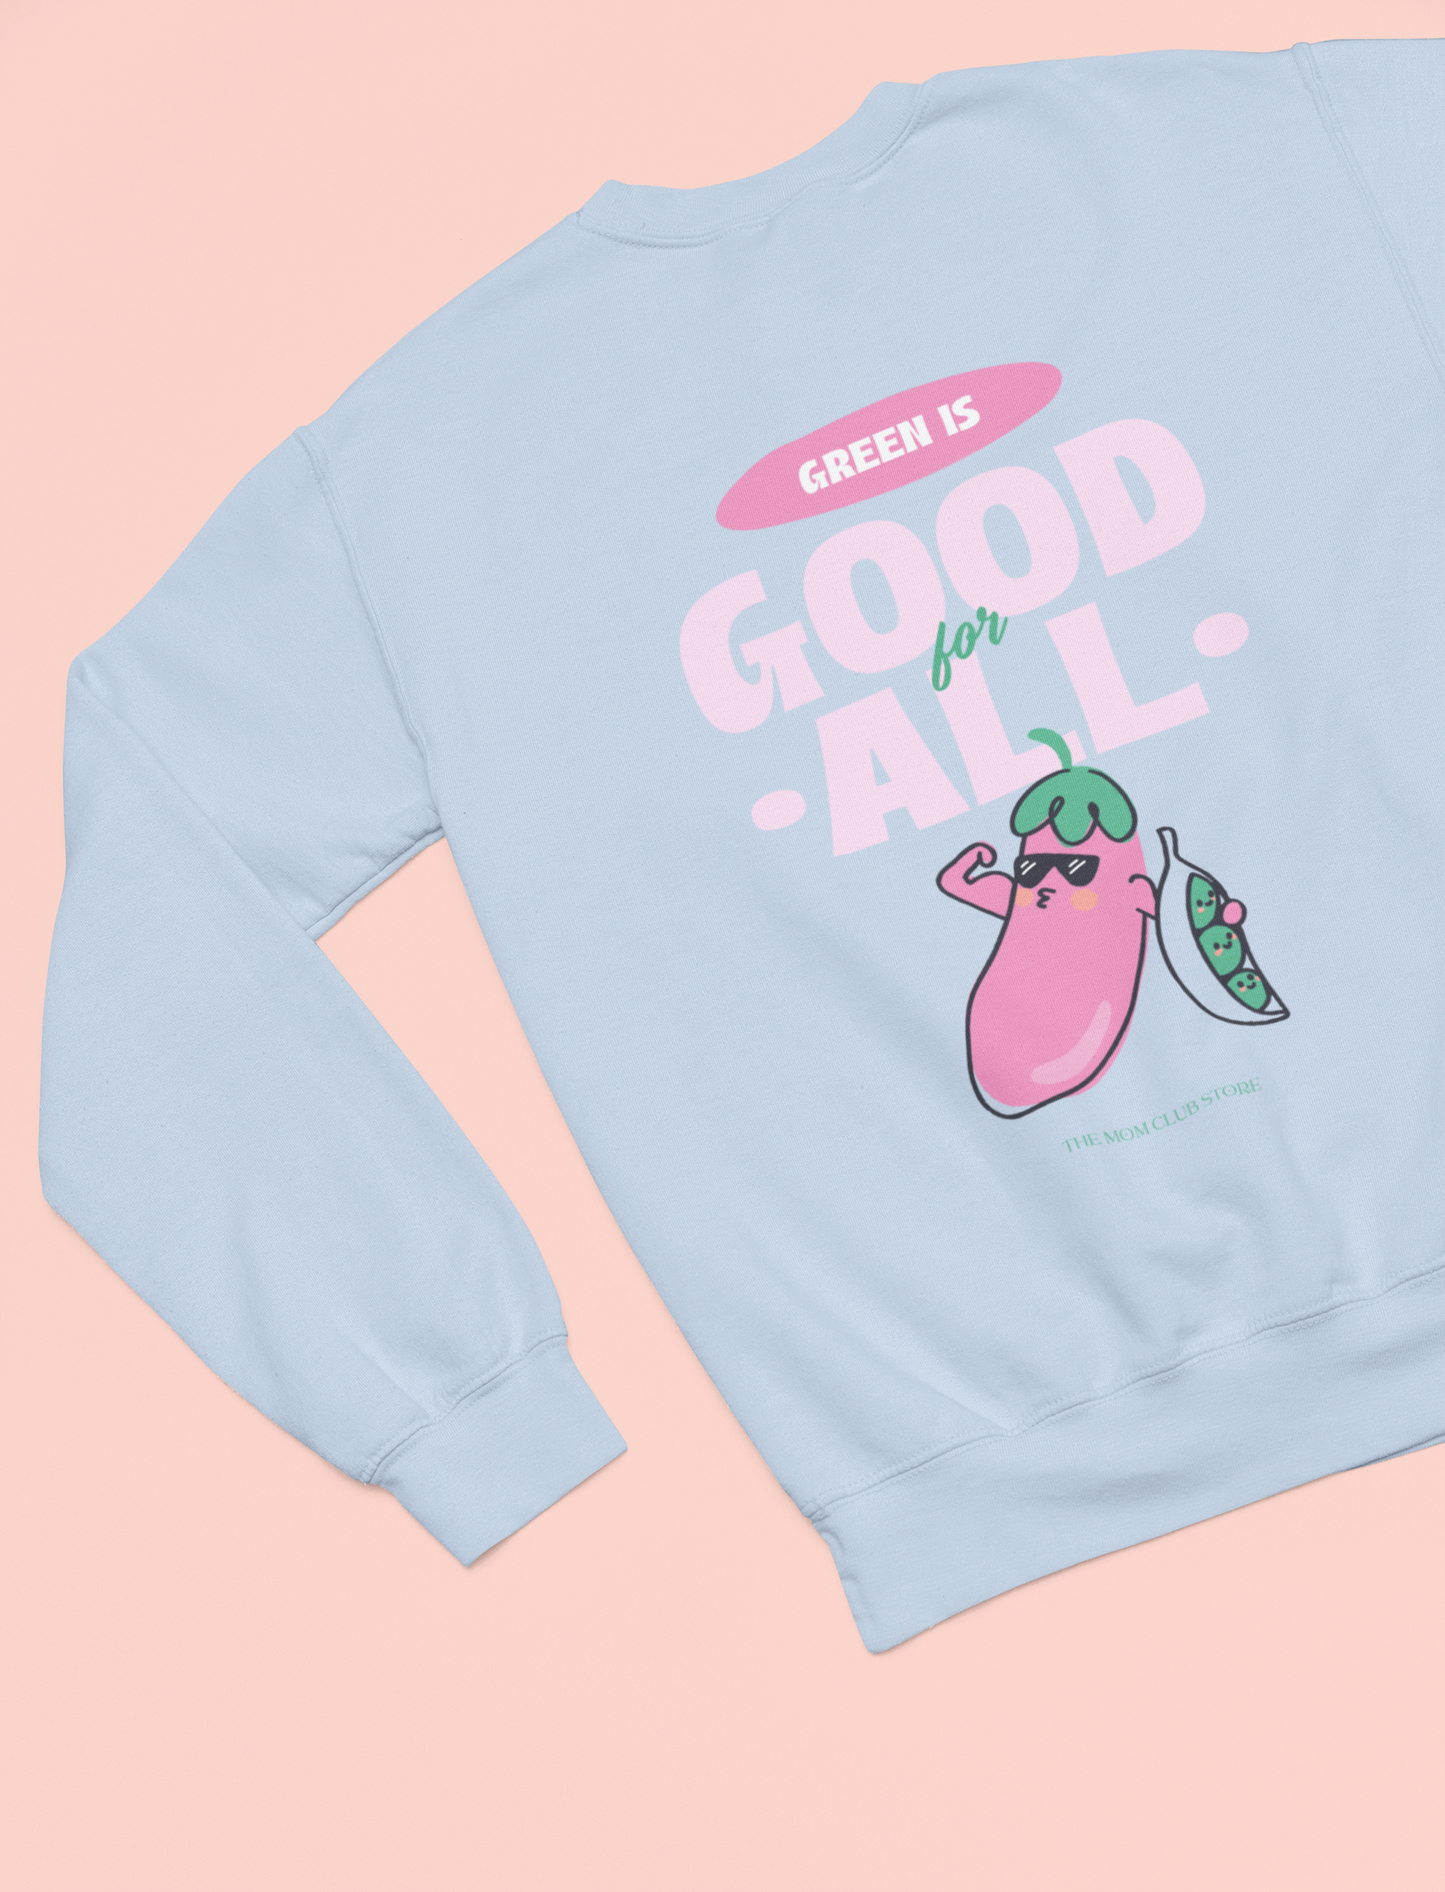 Sweatshirt crewneck -green is good for all- pour adulte